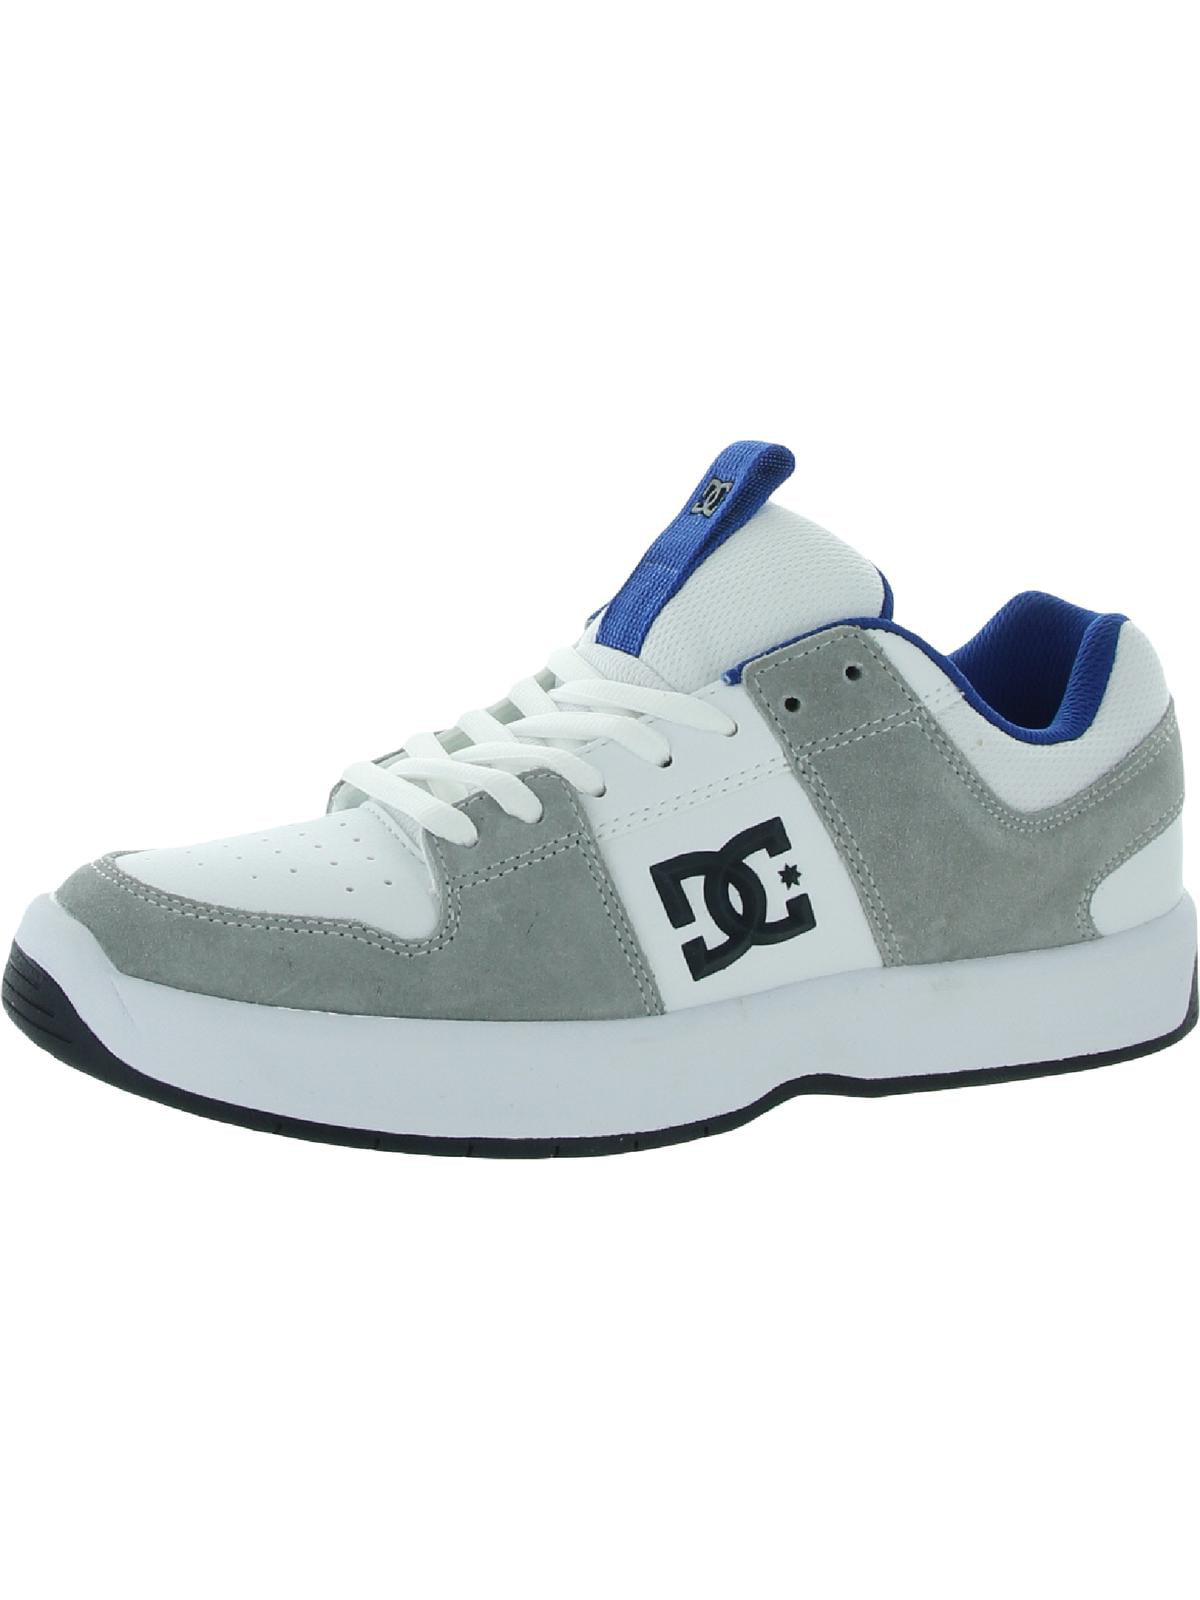 Dc Shoes Pure Youth Lace Up Skate Leather Trainers In Navy Red Size UK 3-6.5 